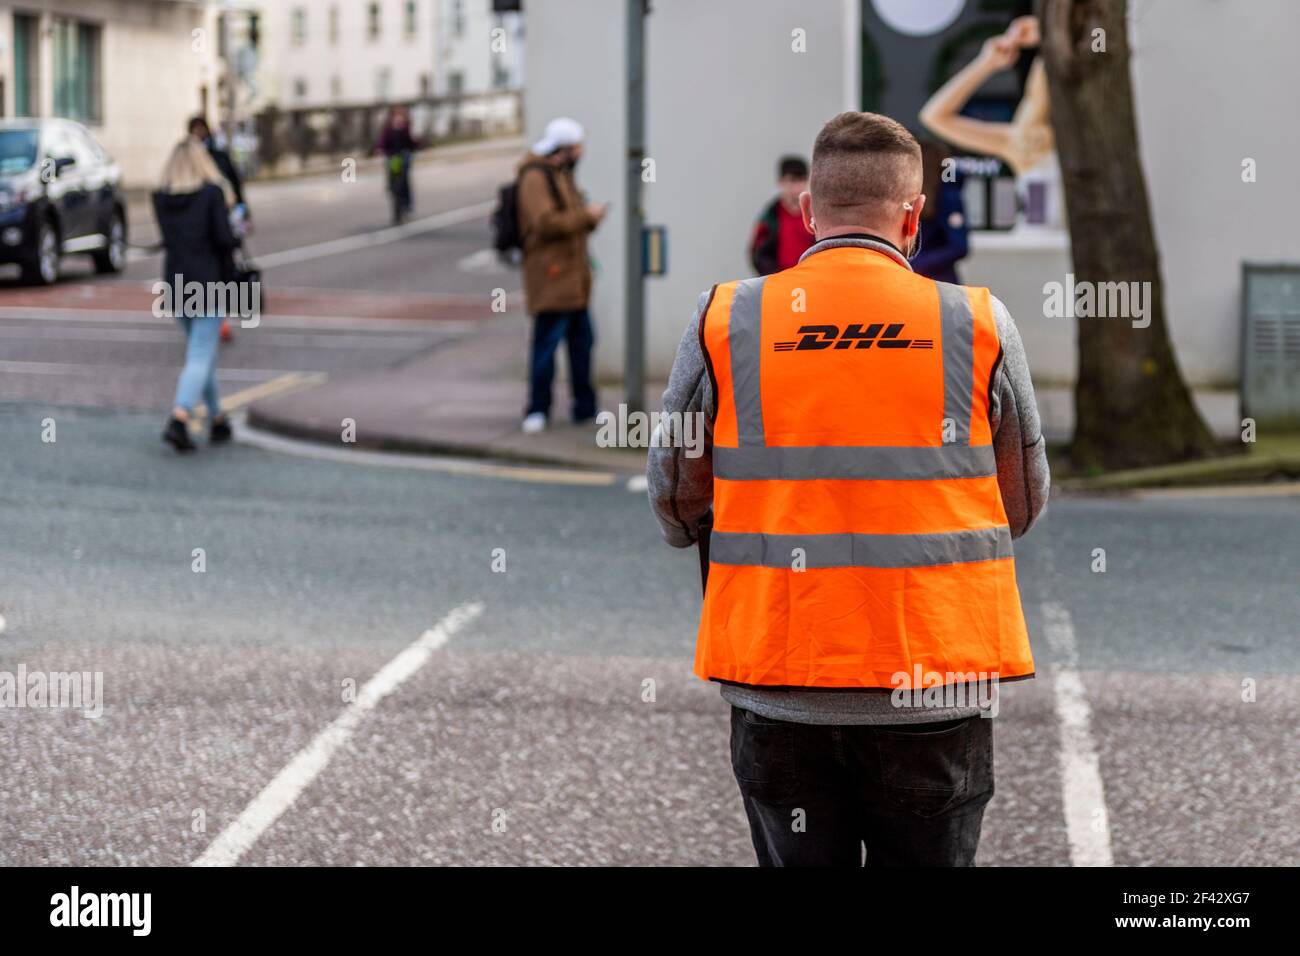 DHL Delivery Driver delivering a parcel in Cork, Ireland. Stock Photo